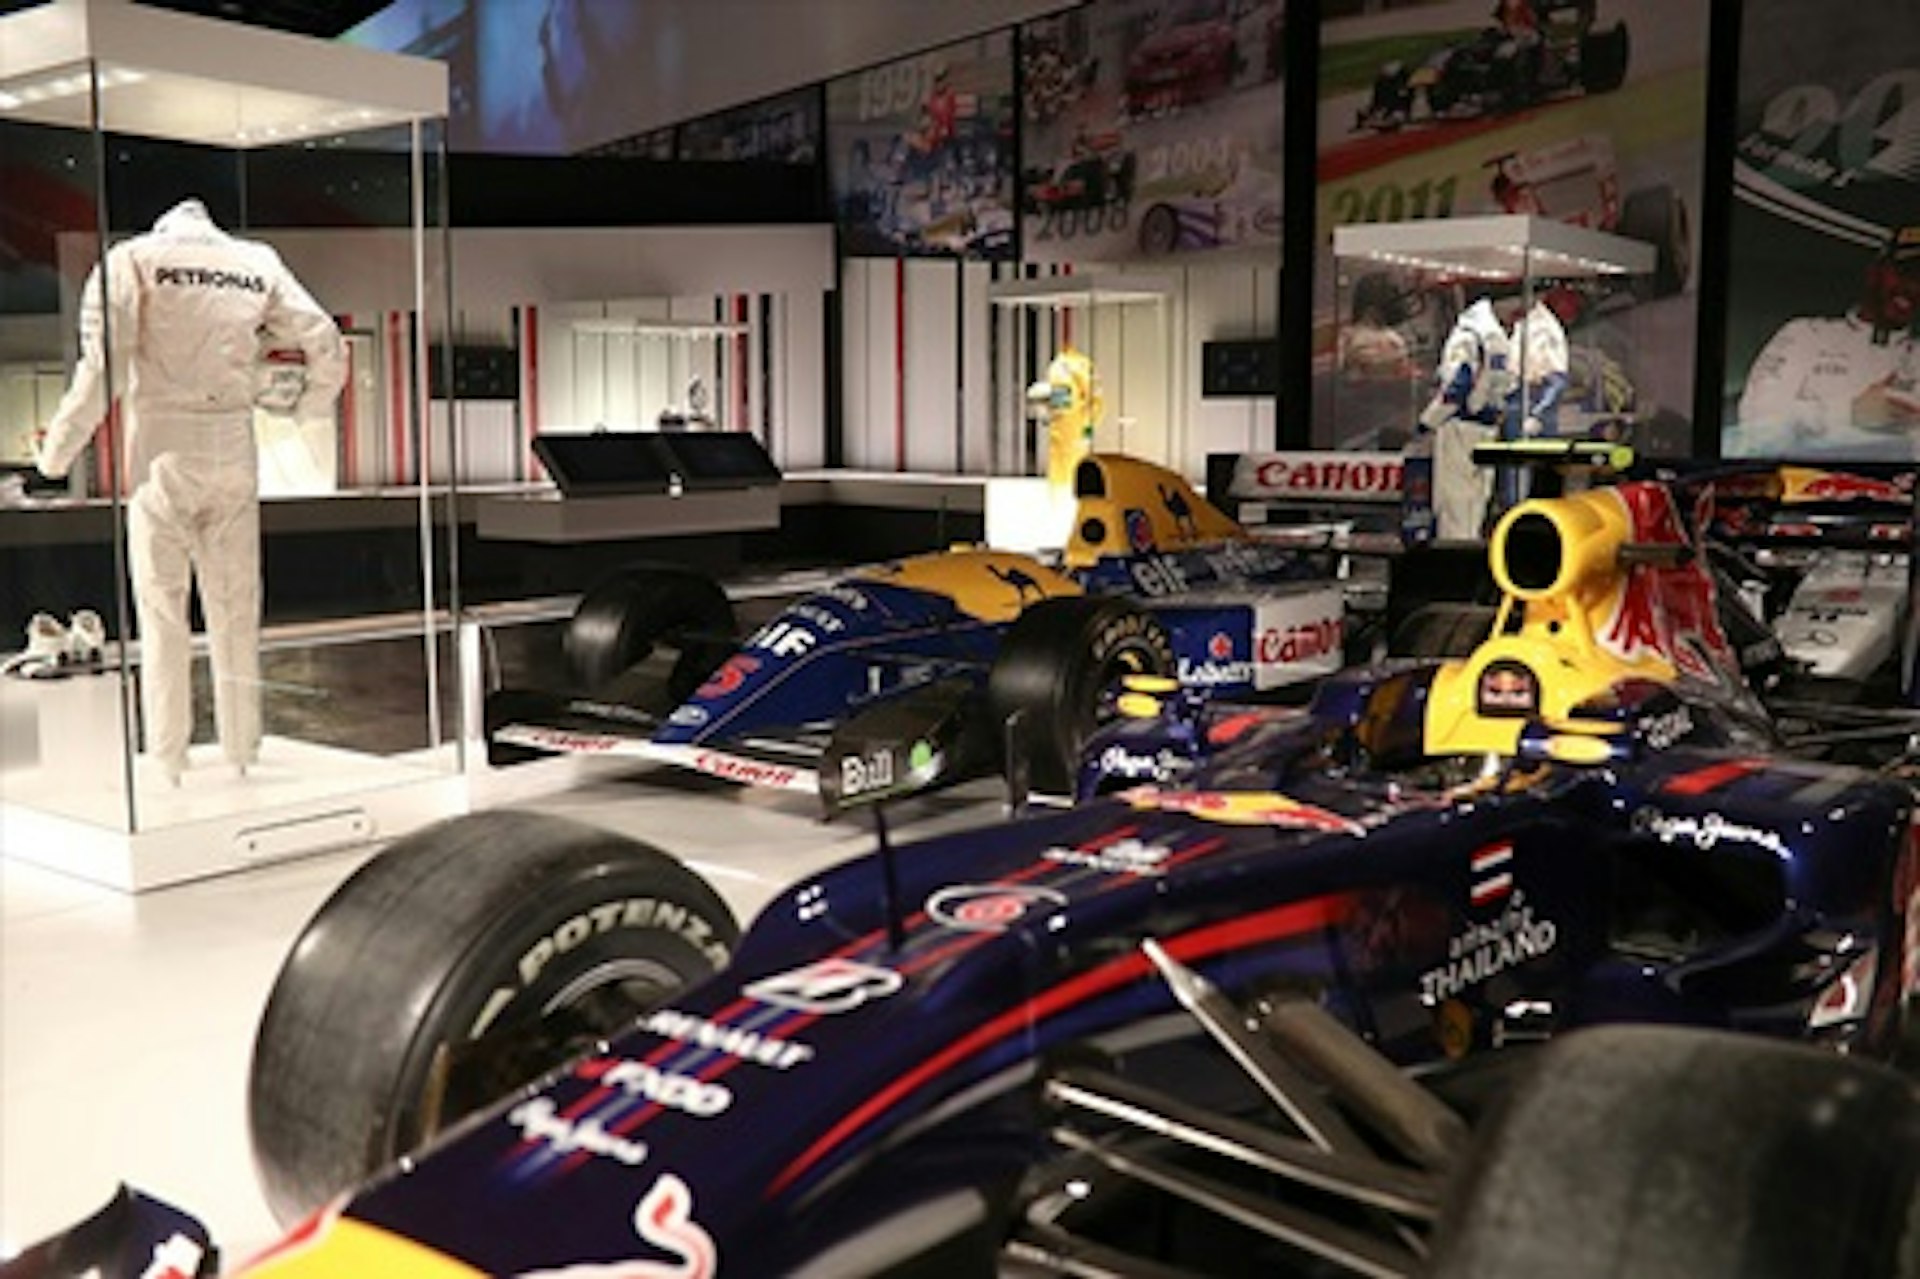 The Silverstone Interactive Museum - An Immersive History of British Motor Racing for Two 1